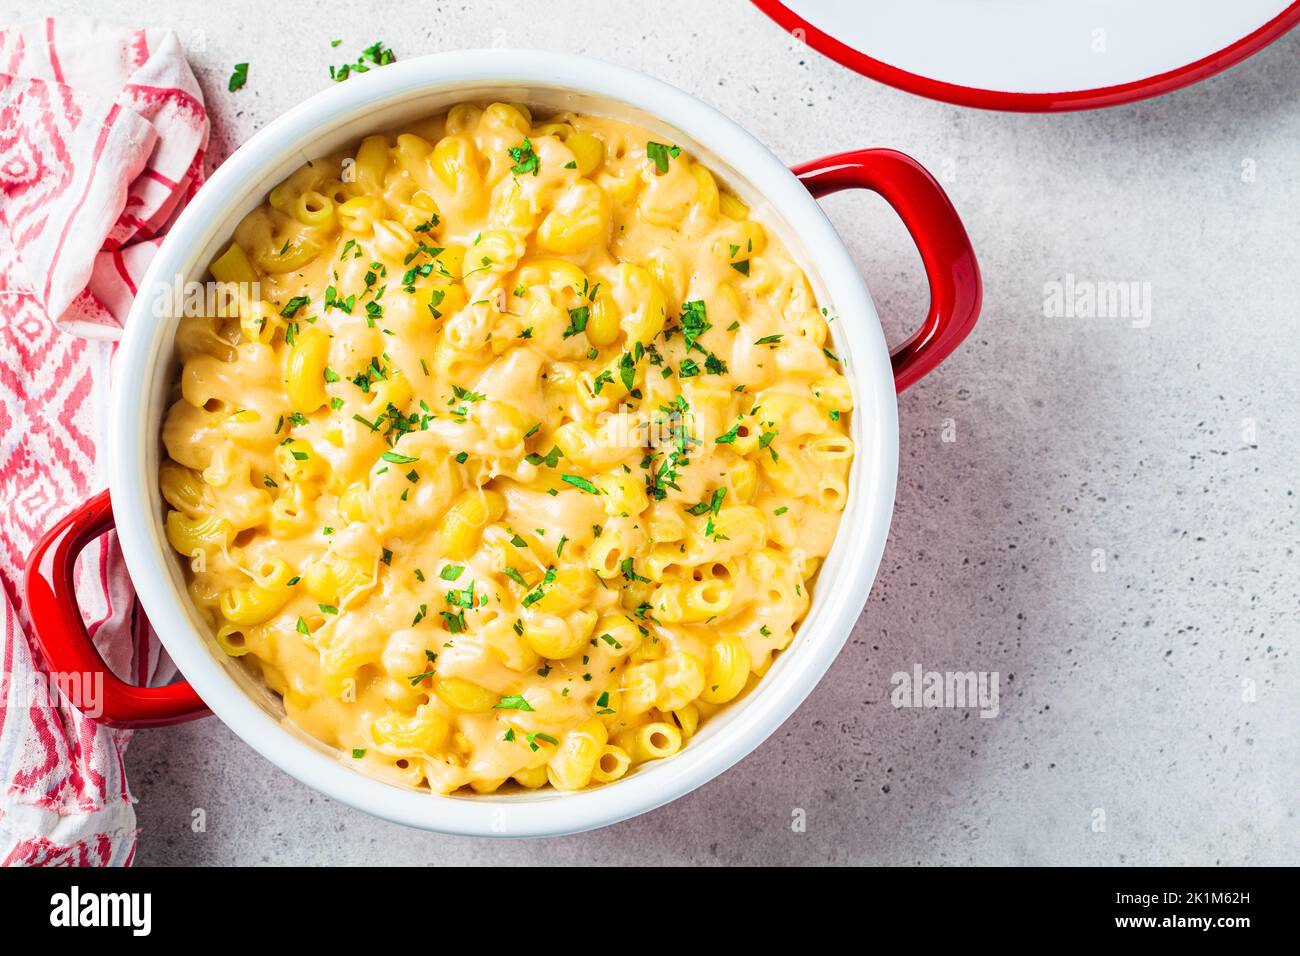 Mac and cheese in red pot, top view. Traditional American food. Stock Photo